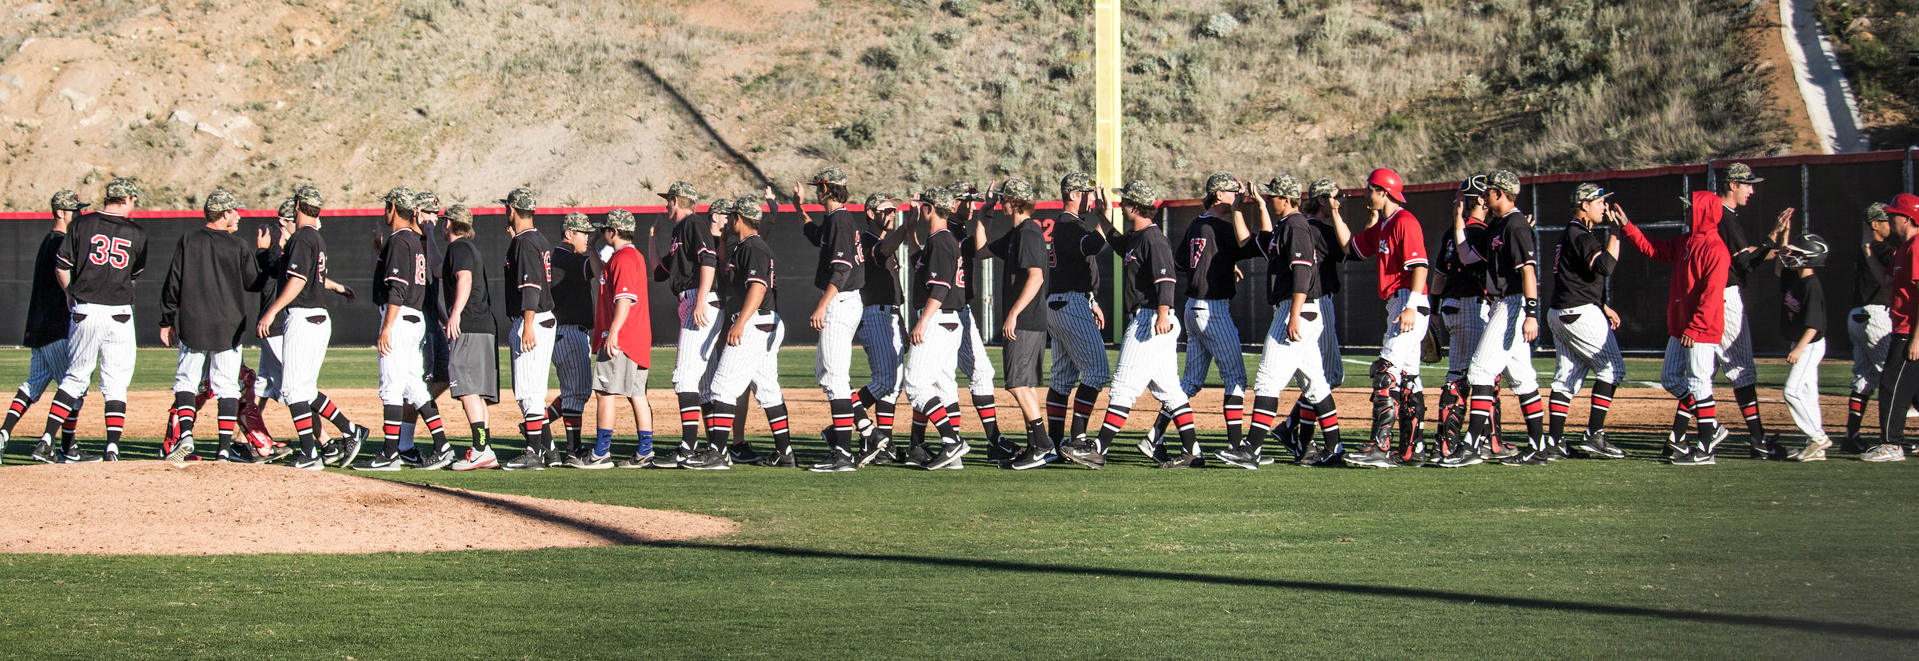 Congratulations on the win Palomar! We had great game with Fullerton. 7-5. Feb 6, 2016. (Olivia Meers/The Telescope)